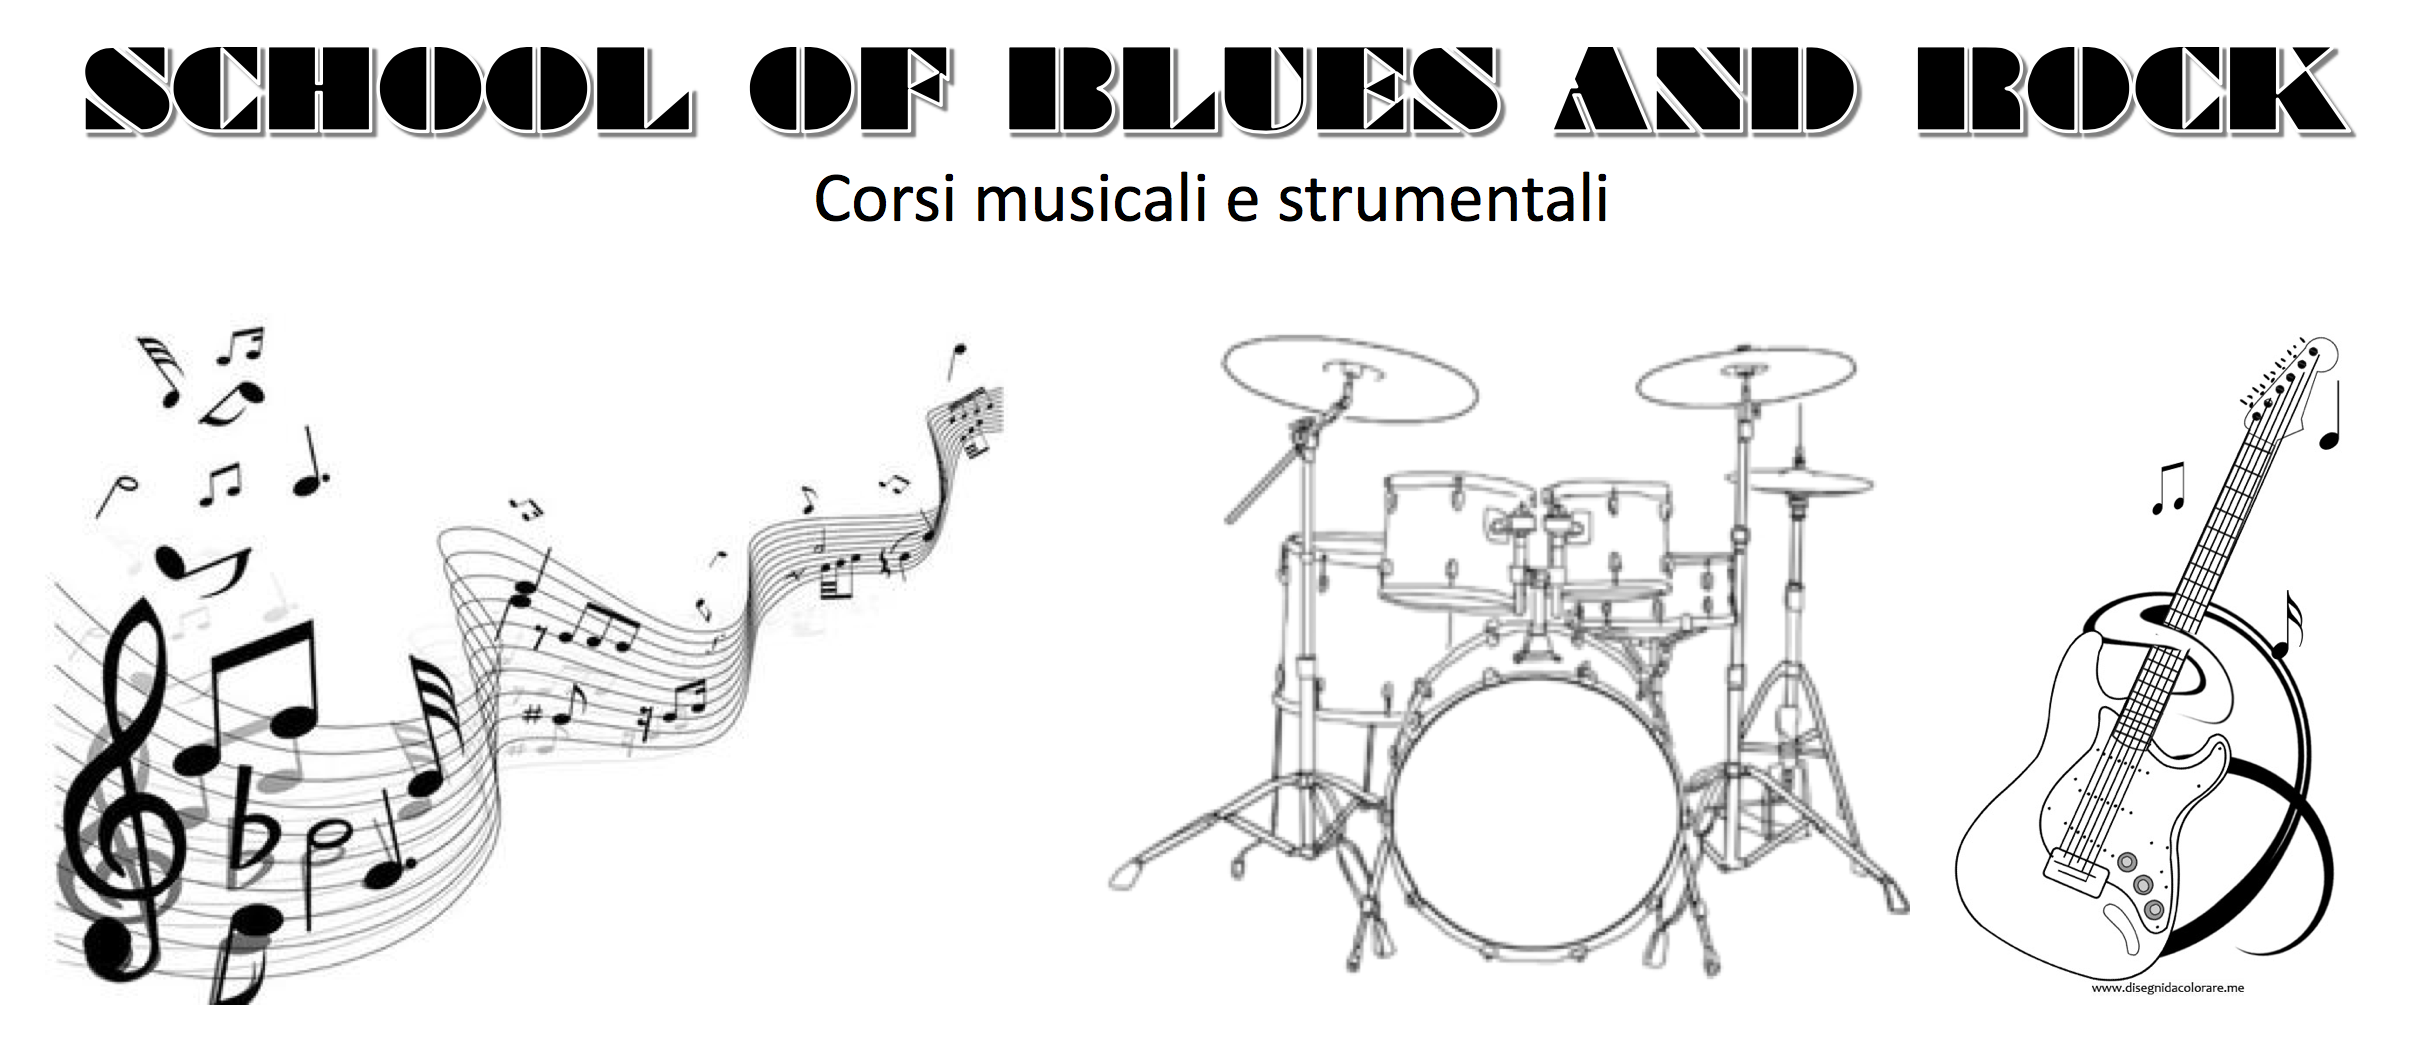 School of Blues and Rock